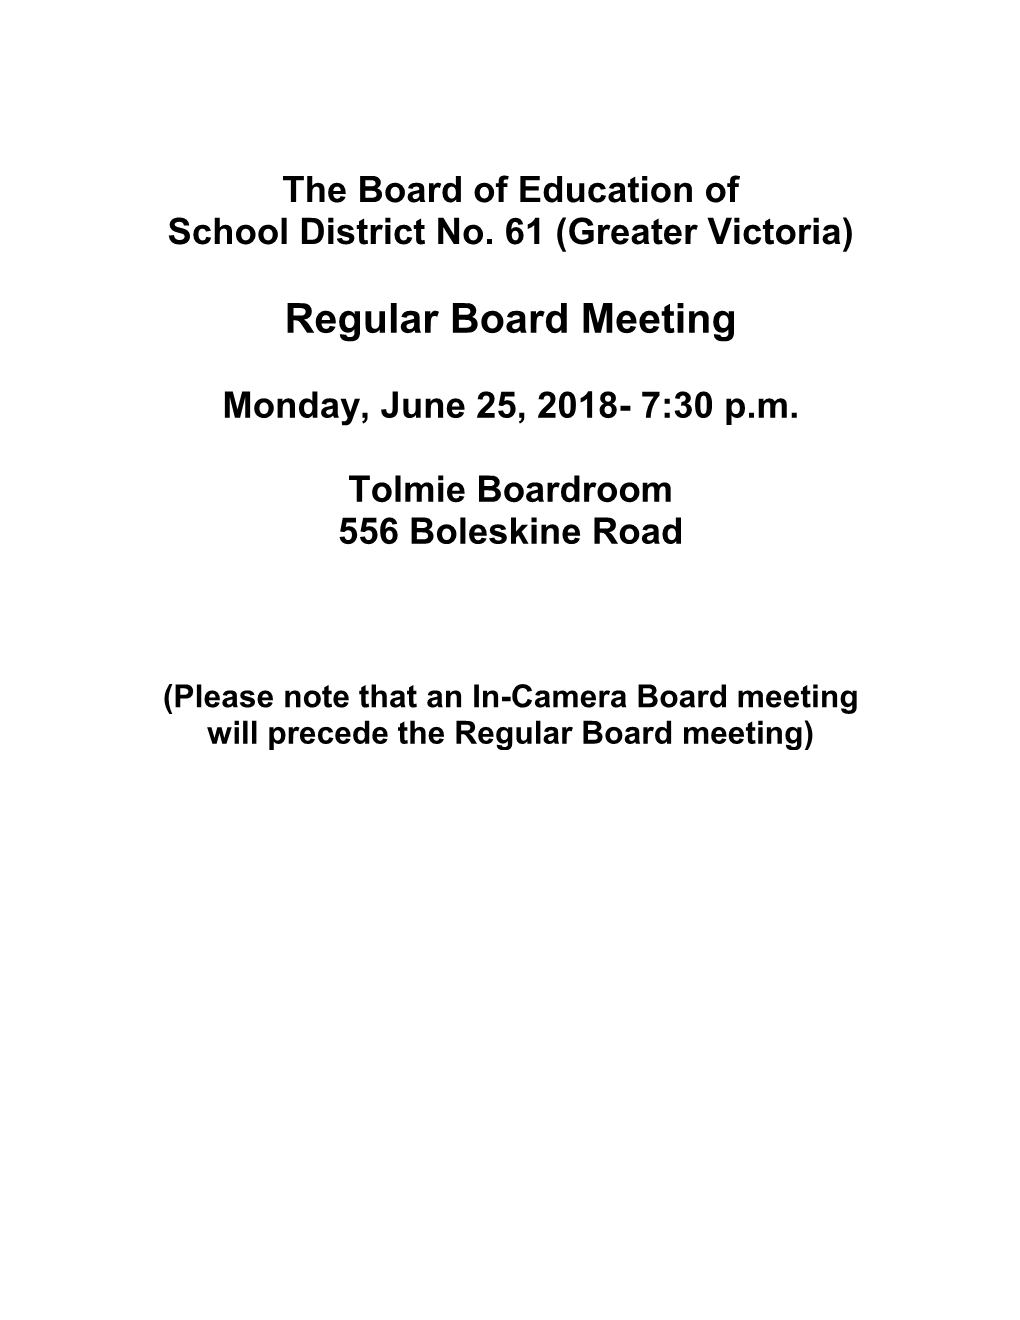 The Board of Education of School District No. 61 (Greater Victoria)